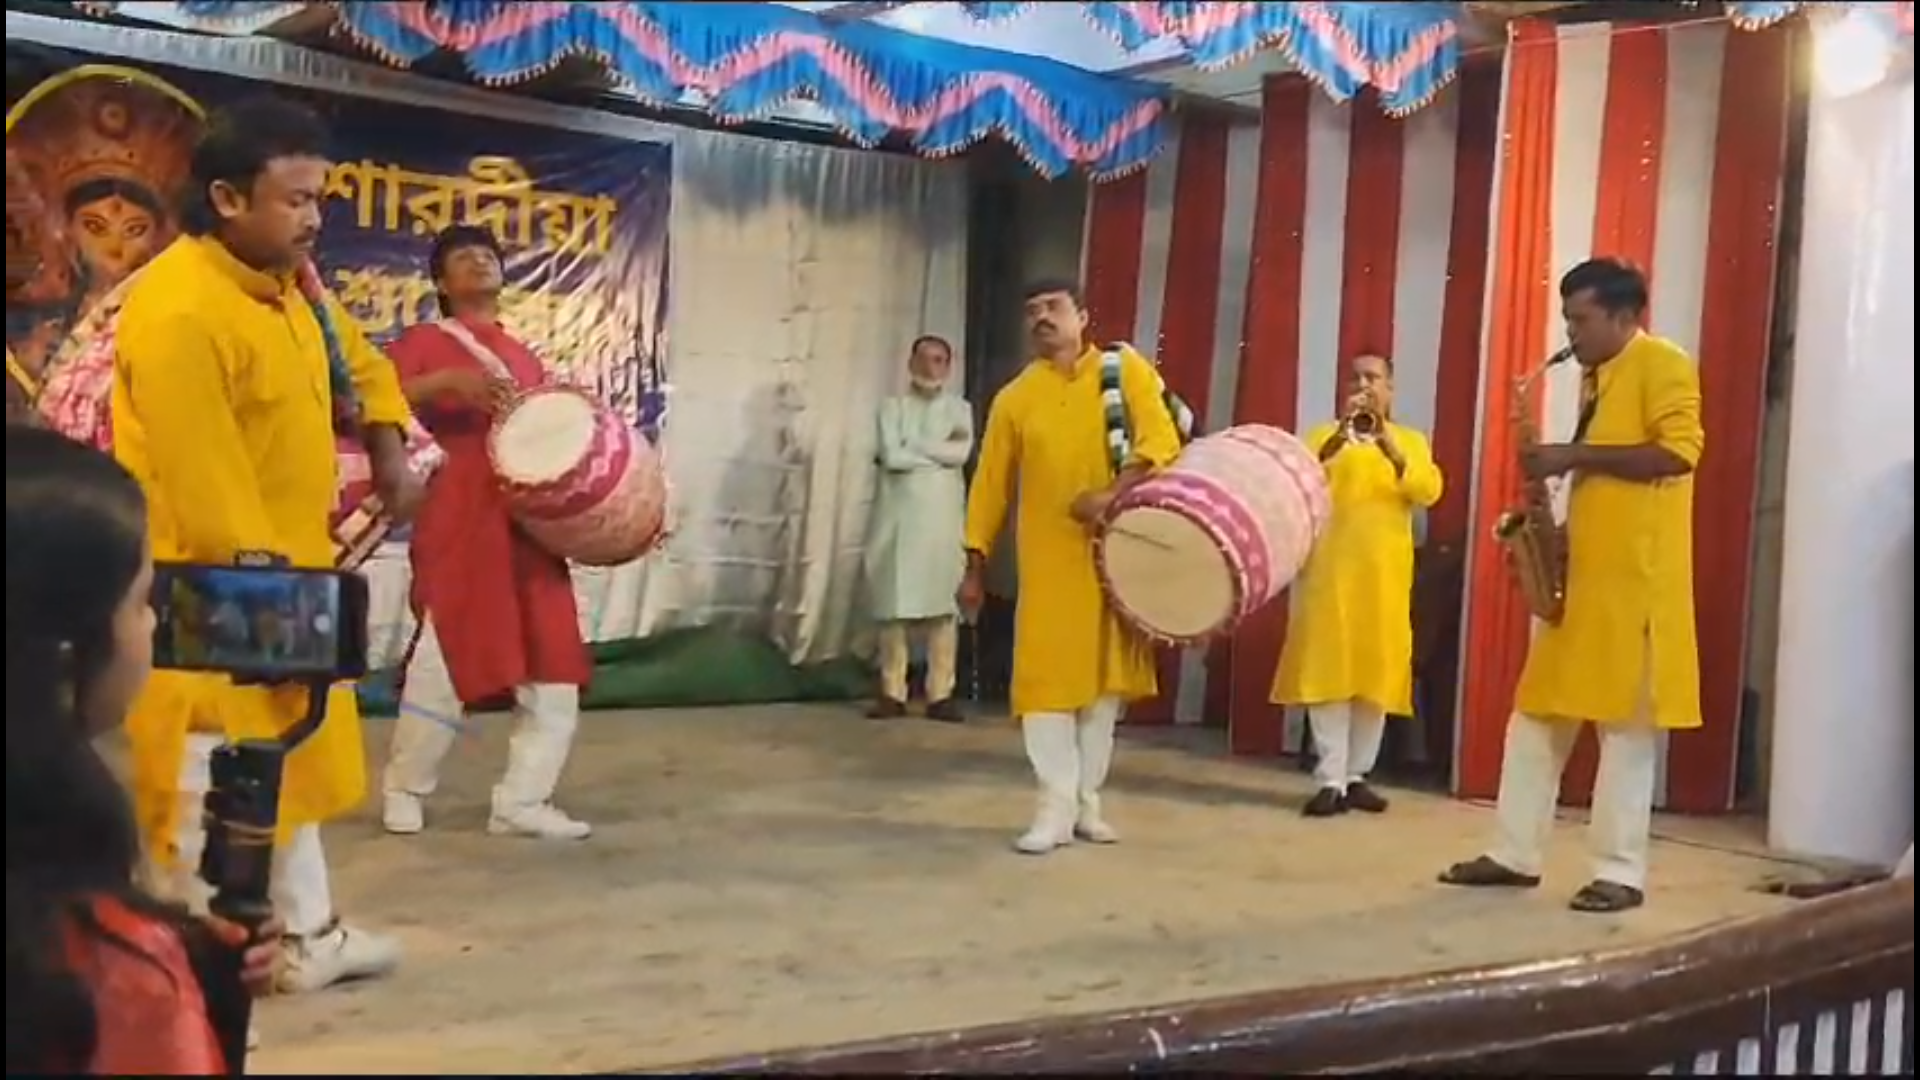 Shillong Durga Puja Celebration: Rilbong drummers win the Dhak competition